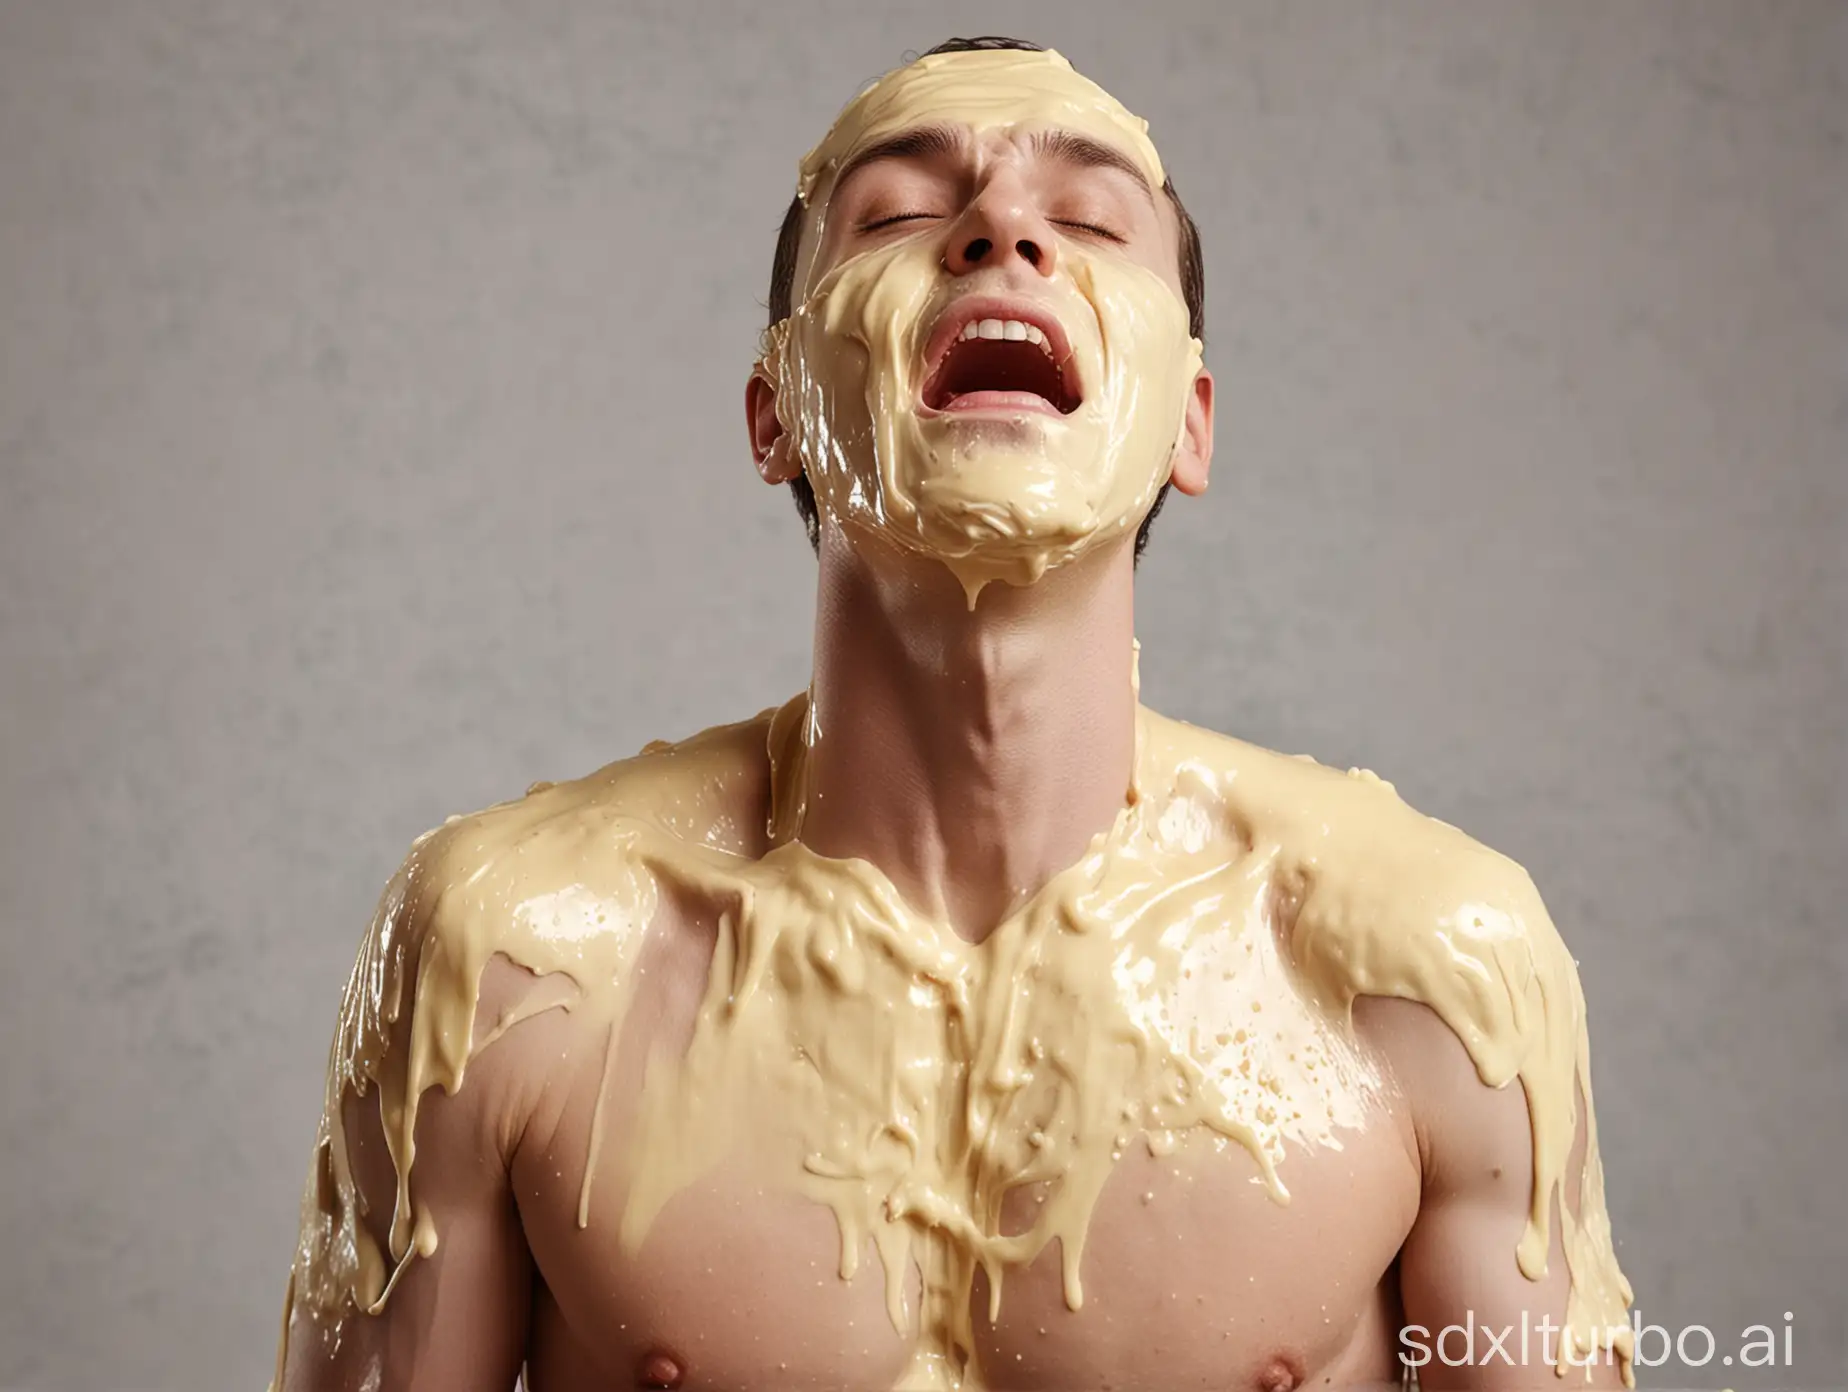 Man covered in butter shaking almost on his chest